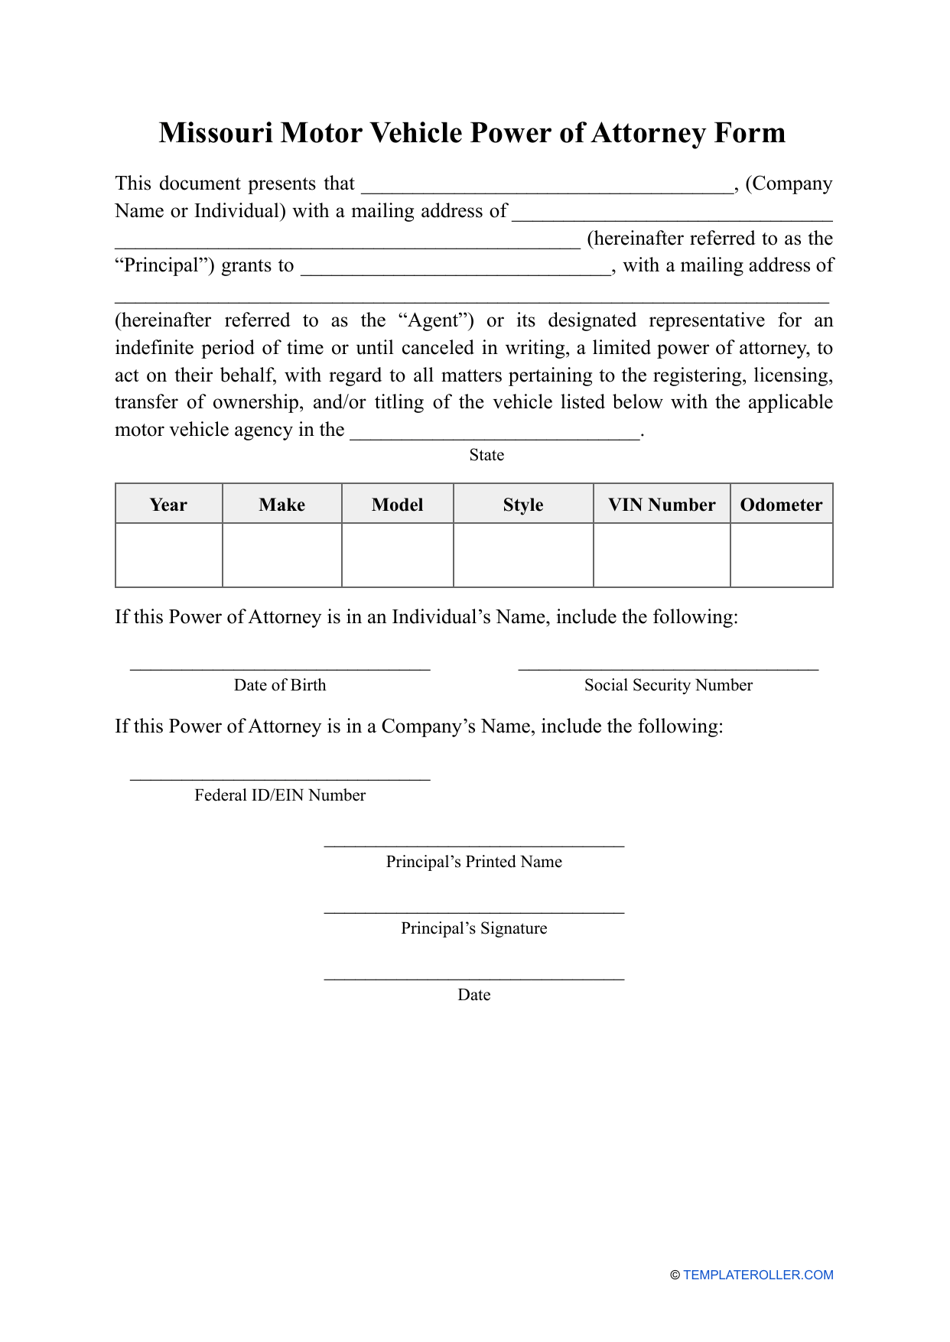 Motor Vehicle Power of Attorney Form - Missouri, Page 1